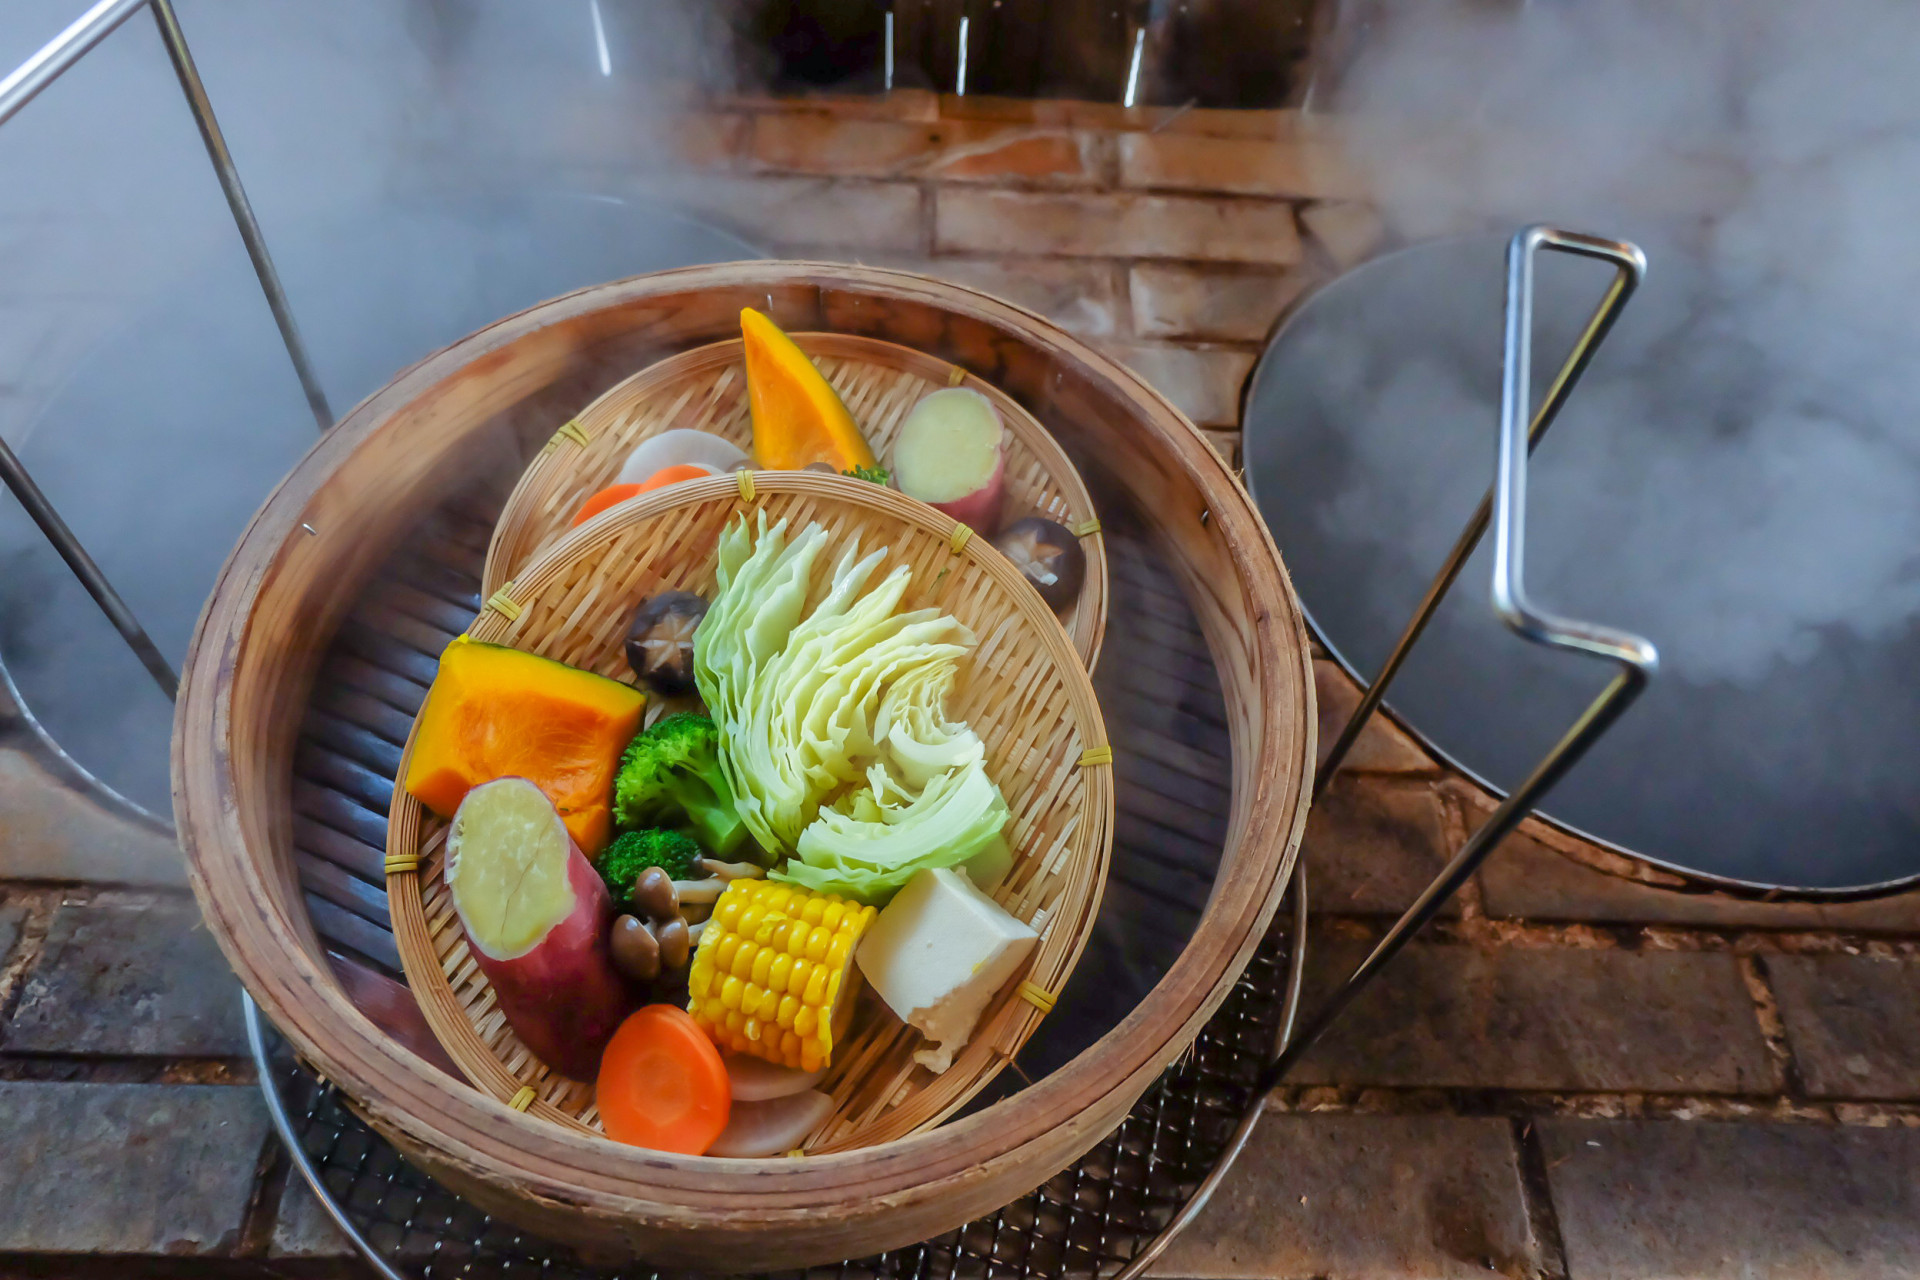 Here visitors can try Jigoku mushi: eggs and vegetables cooked by the steam from the springs.<p>You may also like:<a href="https://www.starsinsider.com/n/396105?utm_source=msn.com&utm_medium=display&utm_campaign=referral_description&utm_content=183441v2en-ae"> Definitive dog walking dos and don'ts</a></p>